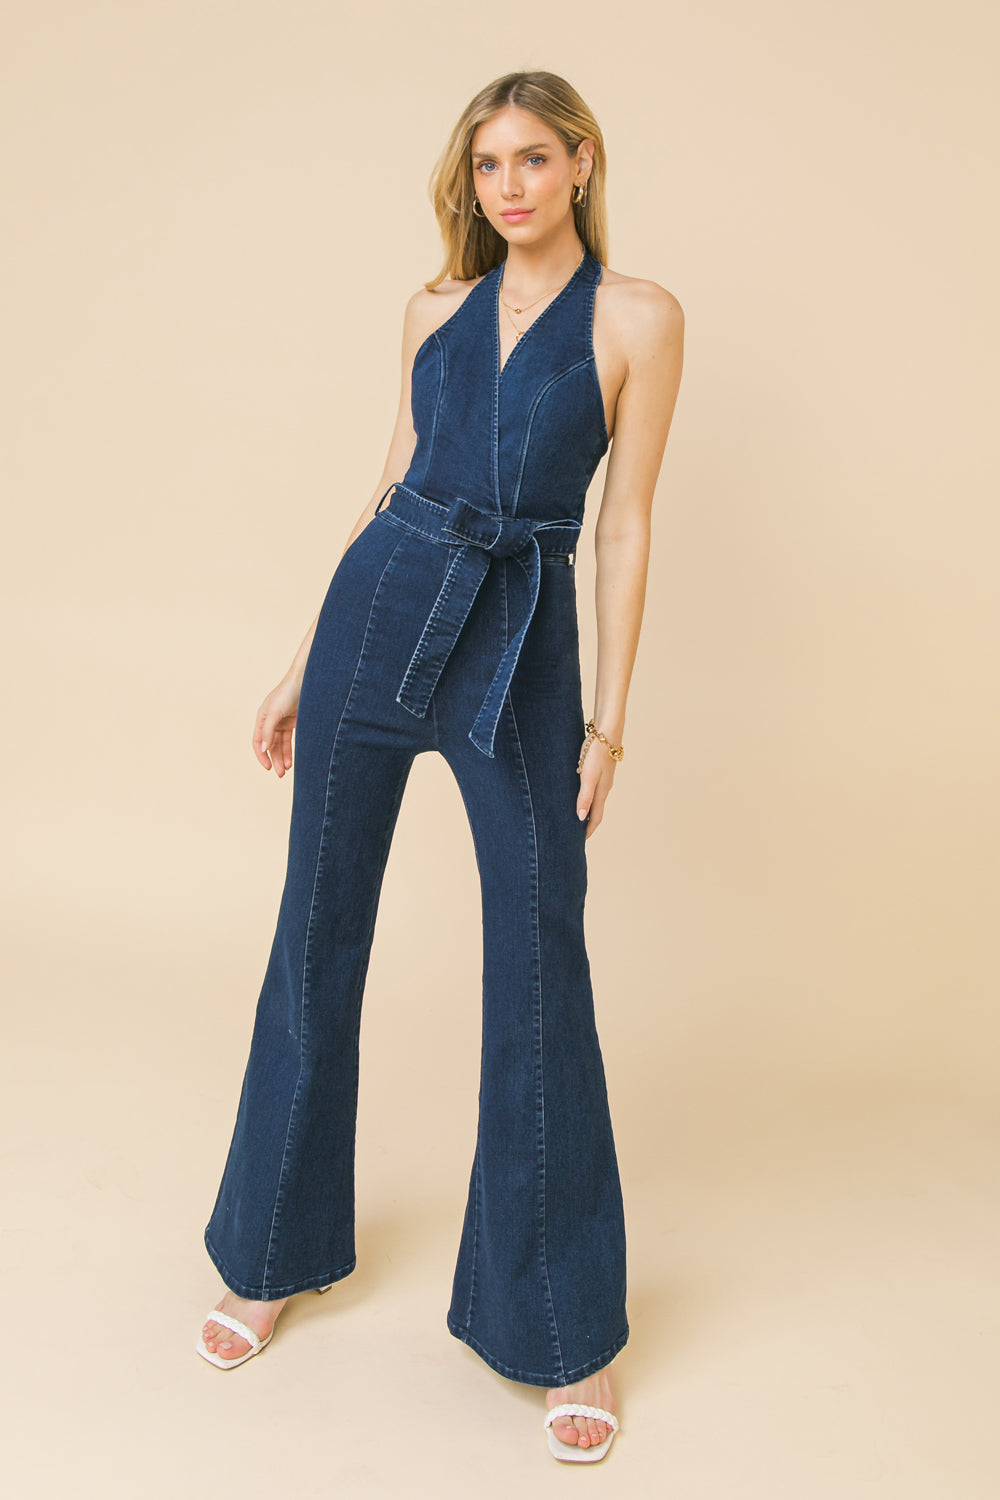 LOVED MY YOU DENIM JUMPSUIT